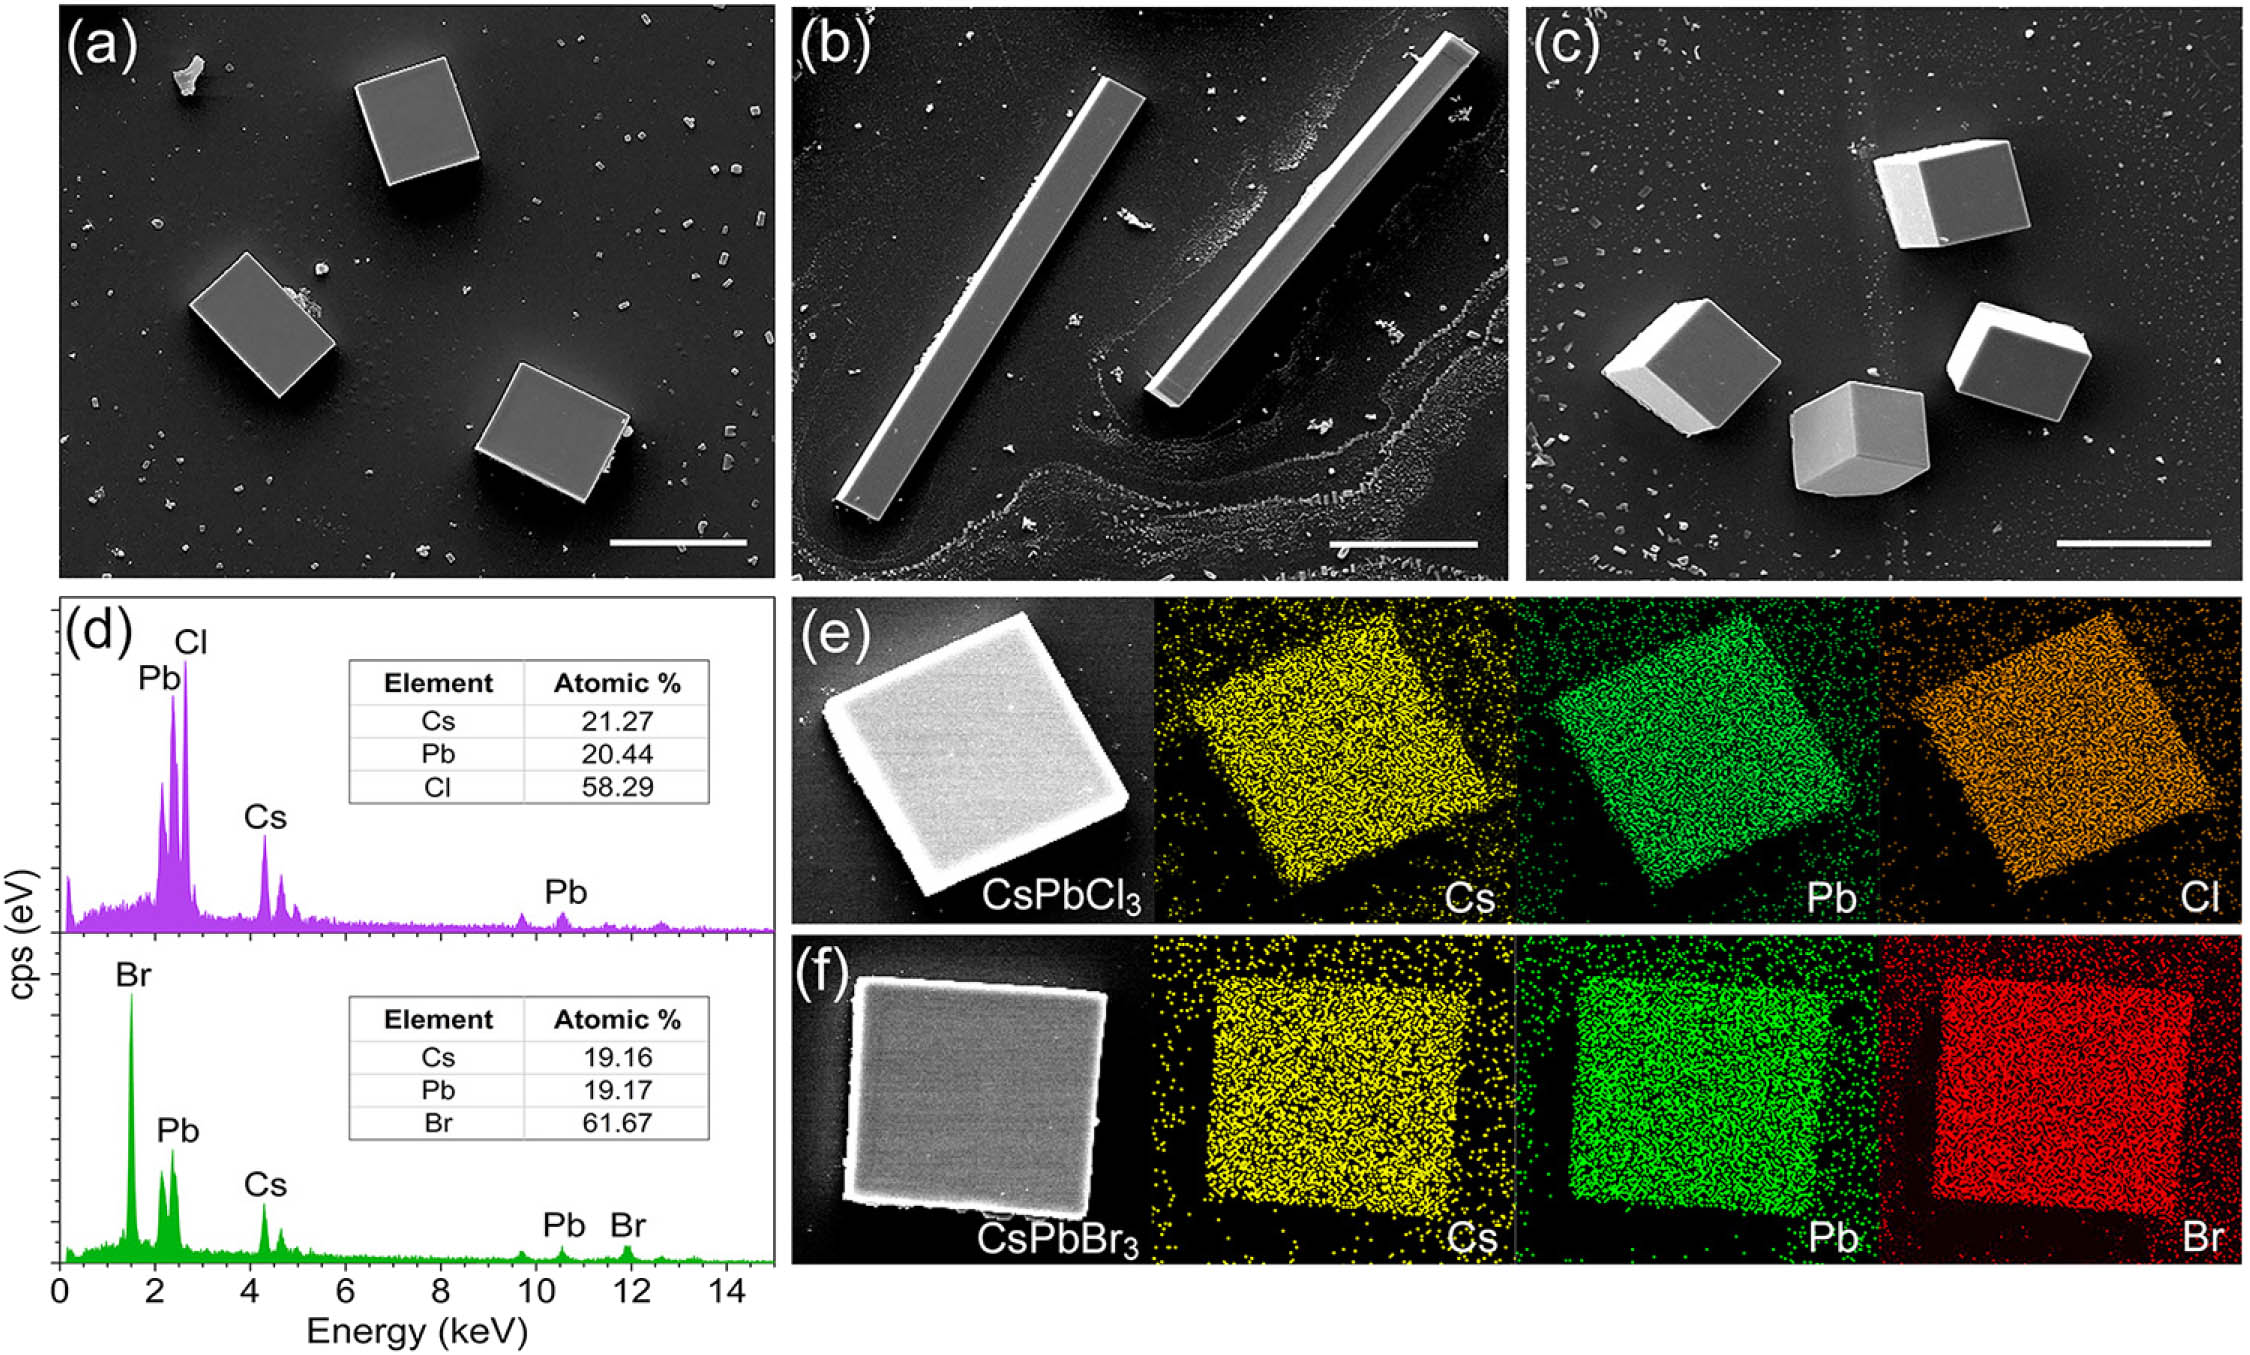 Geometry of the CsPbClxBr3−x single microcrystals on different substrates. SEM micrograph of CsPbBr3 on (a) single-crystal Si, (b) sapphire, and (c) amorphous quartz, with the reactant concentration of 40 mmol/L at an evaporation temperature of 40°C. Scale bars: 50 μm. (d) EDS spectra of the CsPbCl3 and CsPbBr3 microplates. Inset: atomic ratios of Cs/Pb/Cl and Cs/Pb/Br (∼1:1:3). (e), (f) EDS elemental mapping of the corresponding CsPbCl3 and CsPbBr3 microplates, respectively.